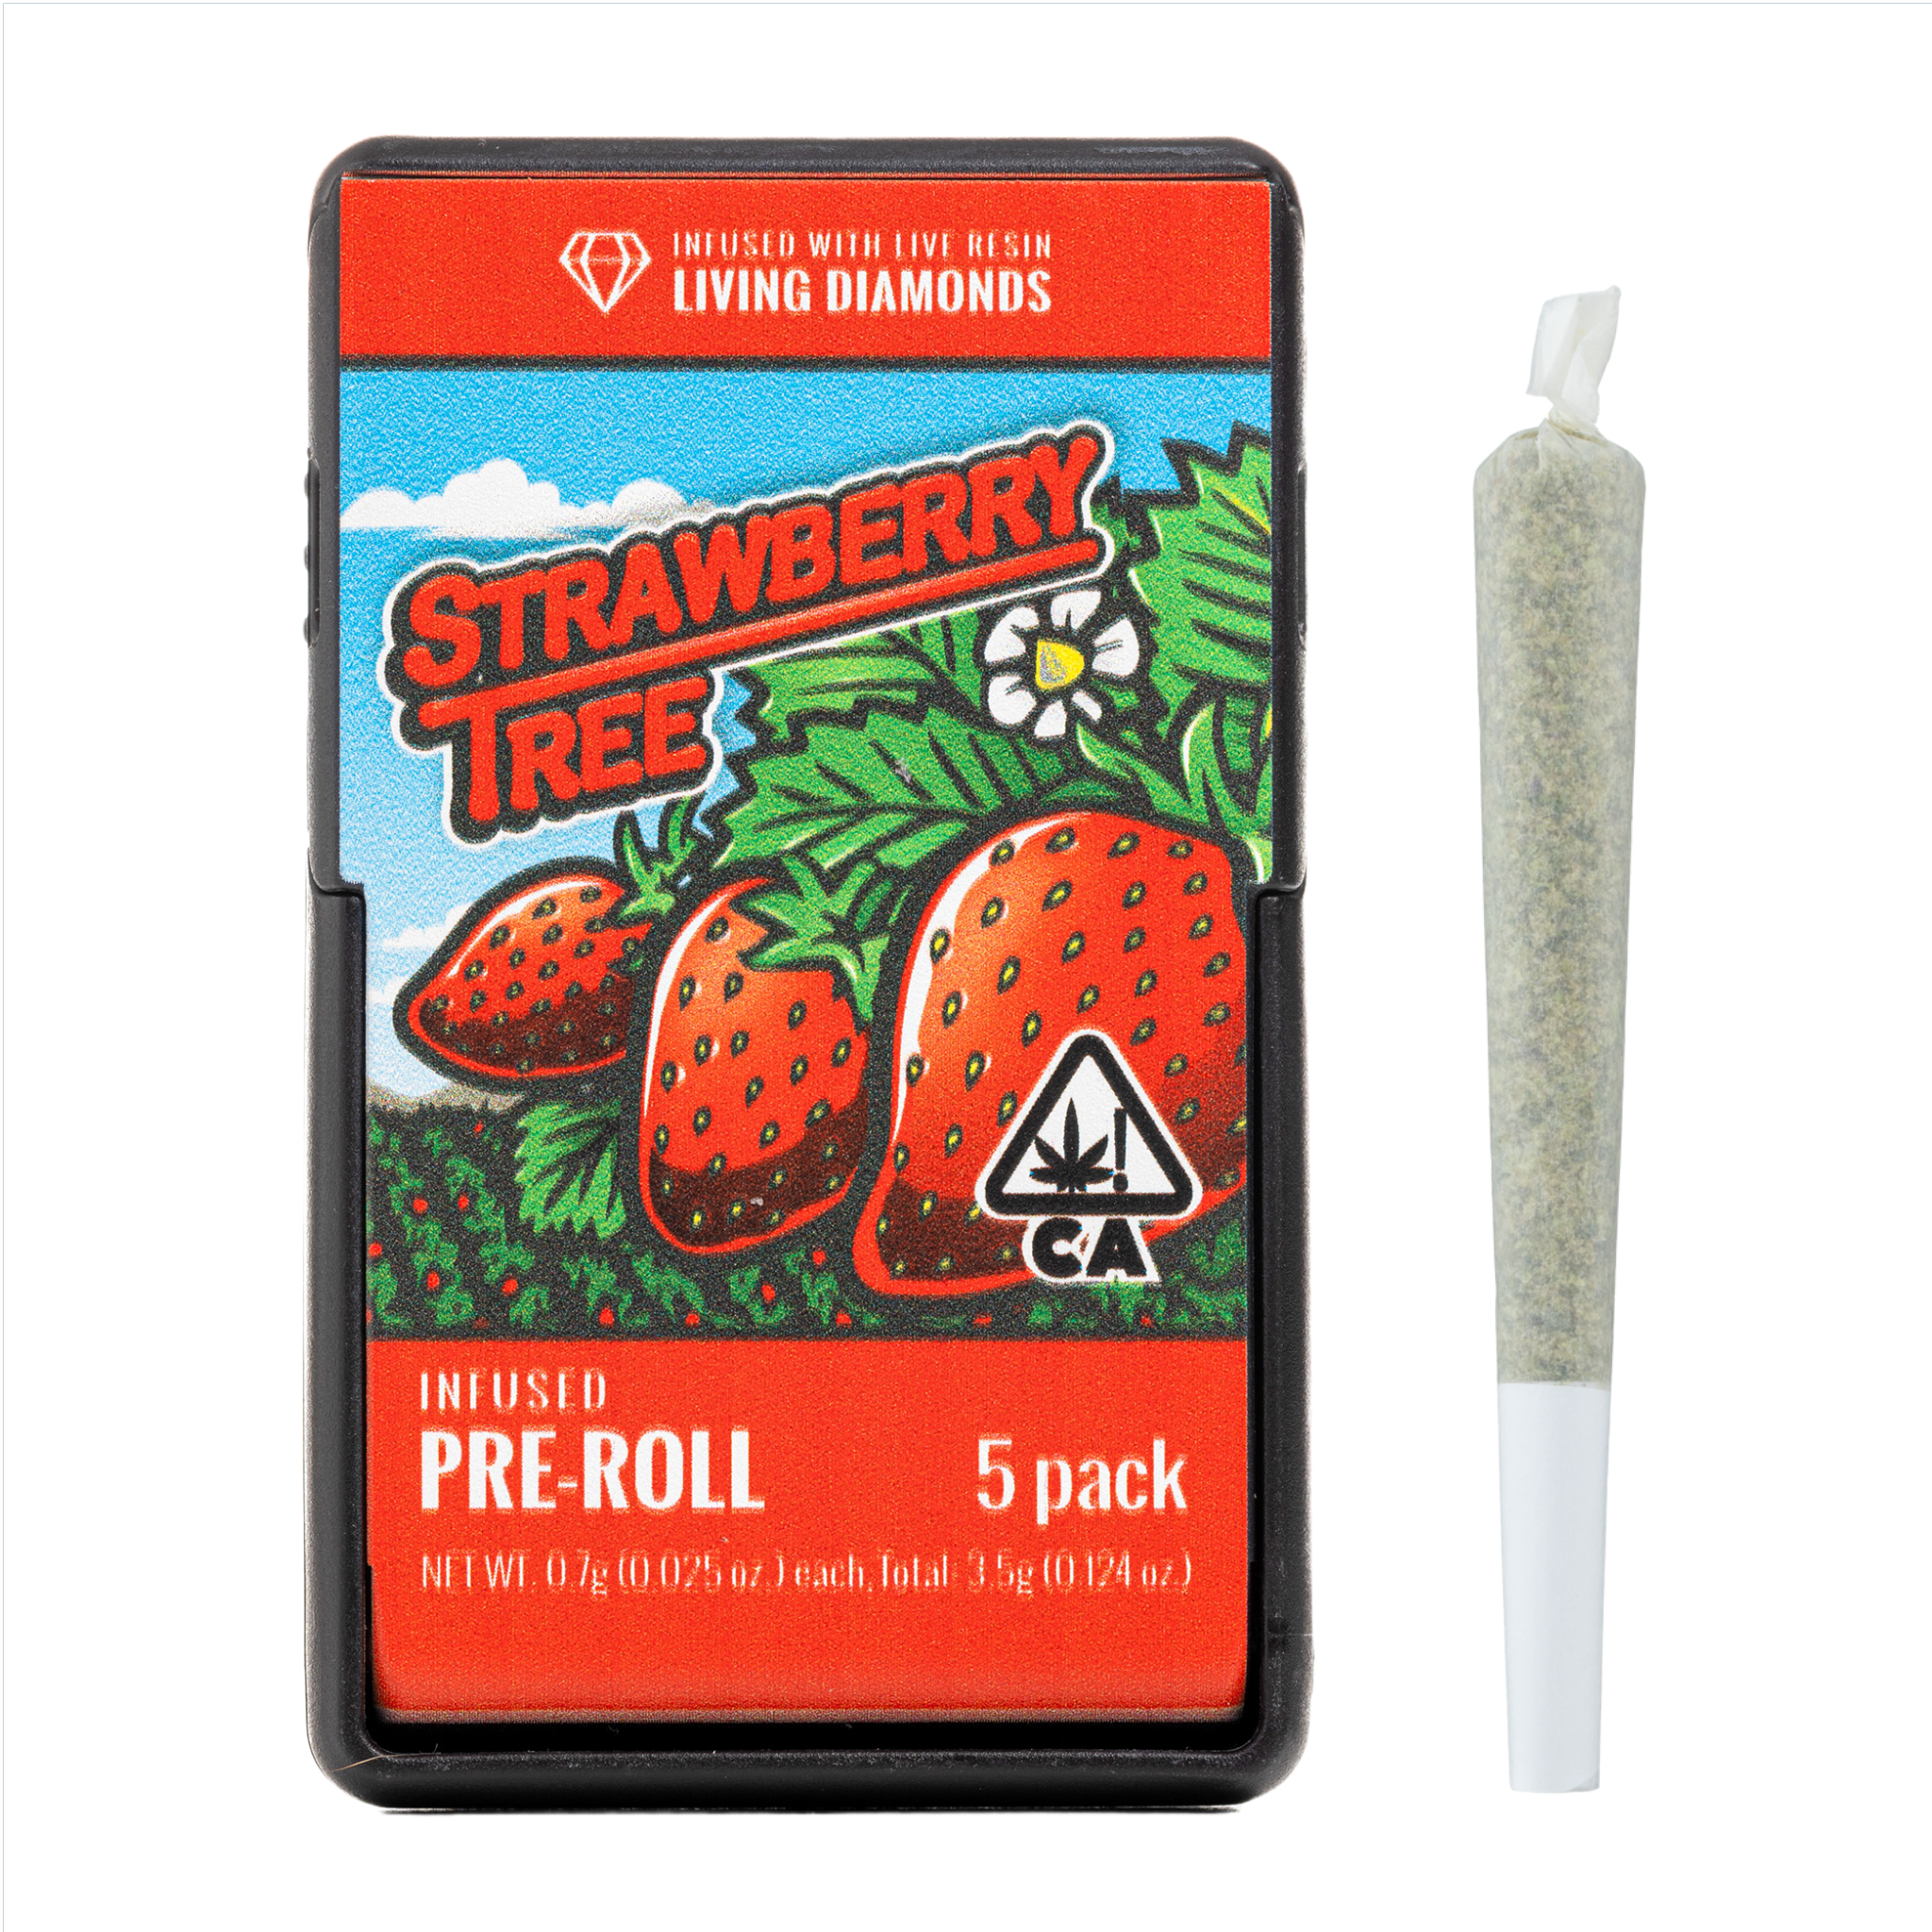 STRAWBERRY TREE - INFUSED 5 PACK - Airfield Supply Co. Cannabis